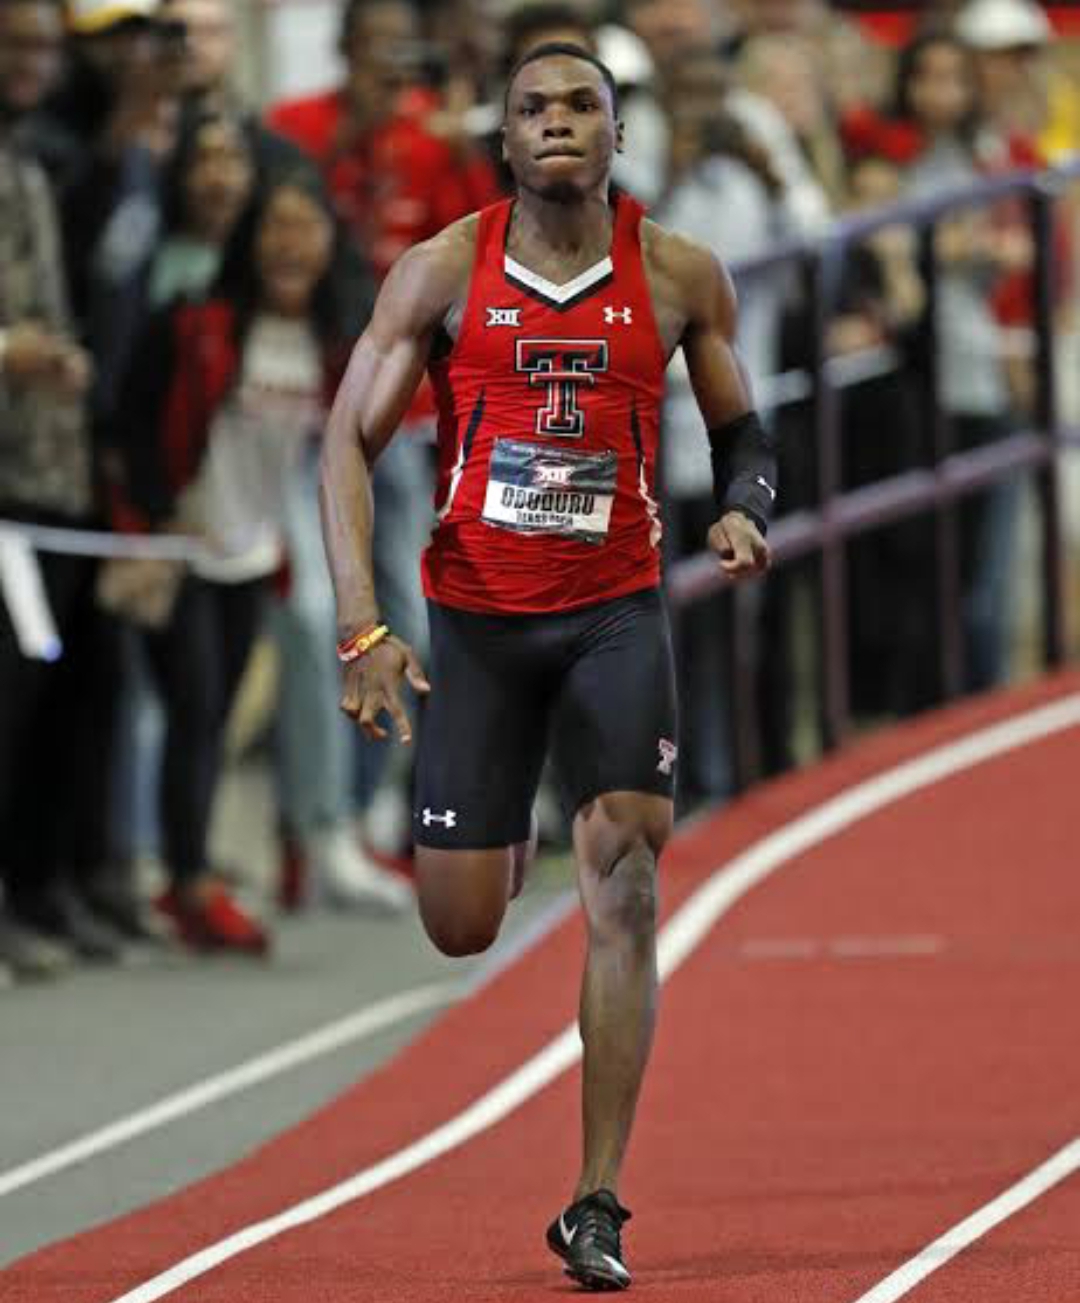 Oduduru: I worked For My 100/200m Feats At Michael Johnson Invitational